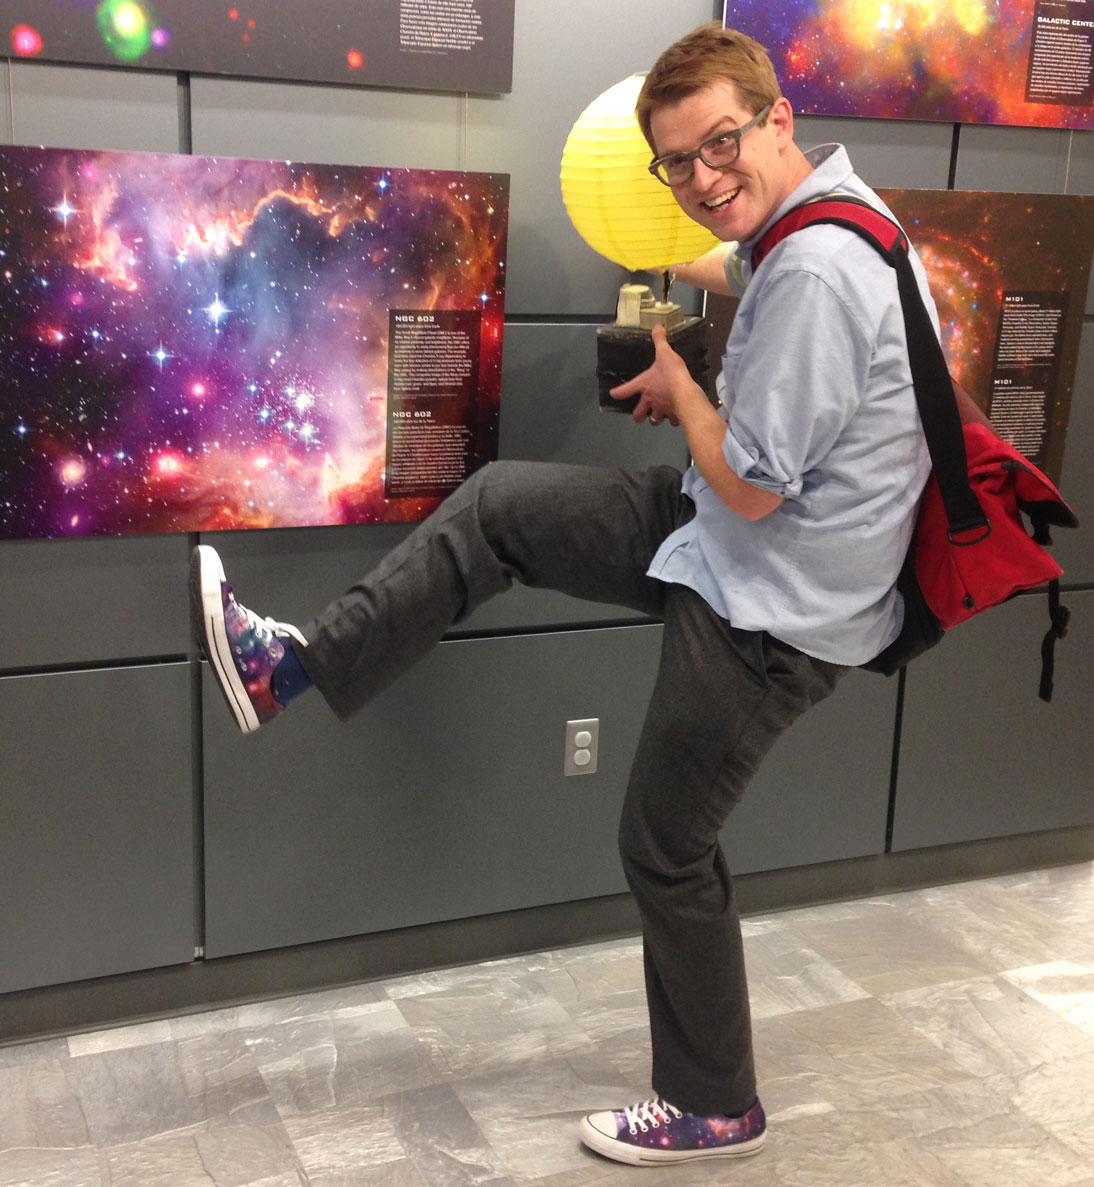 goofy photo of Zach finding that his shoes match a printed Hubble image of NGC 602 that he found on a planetarium wall